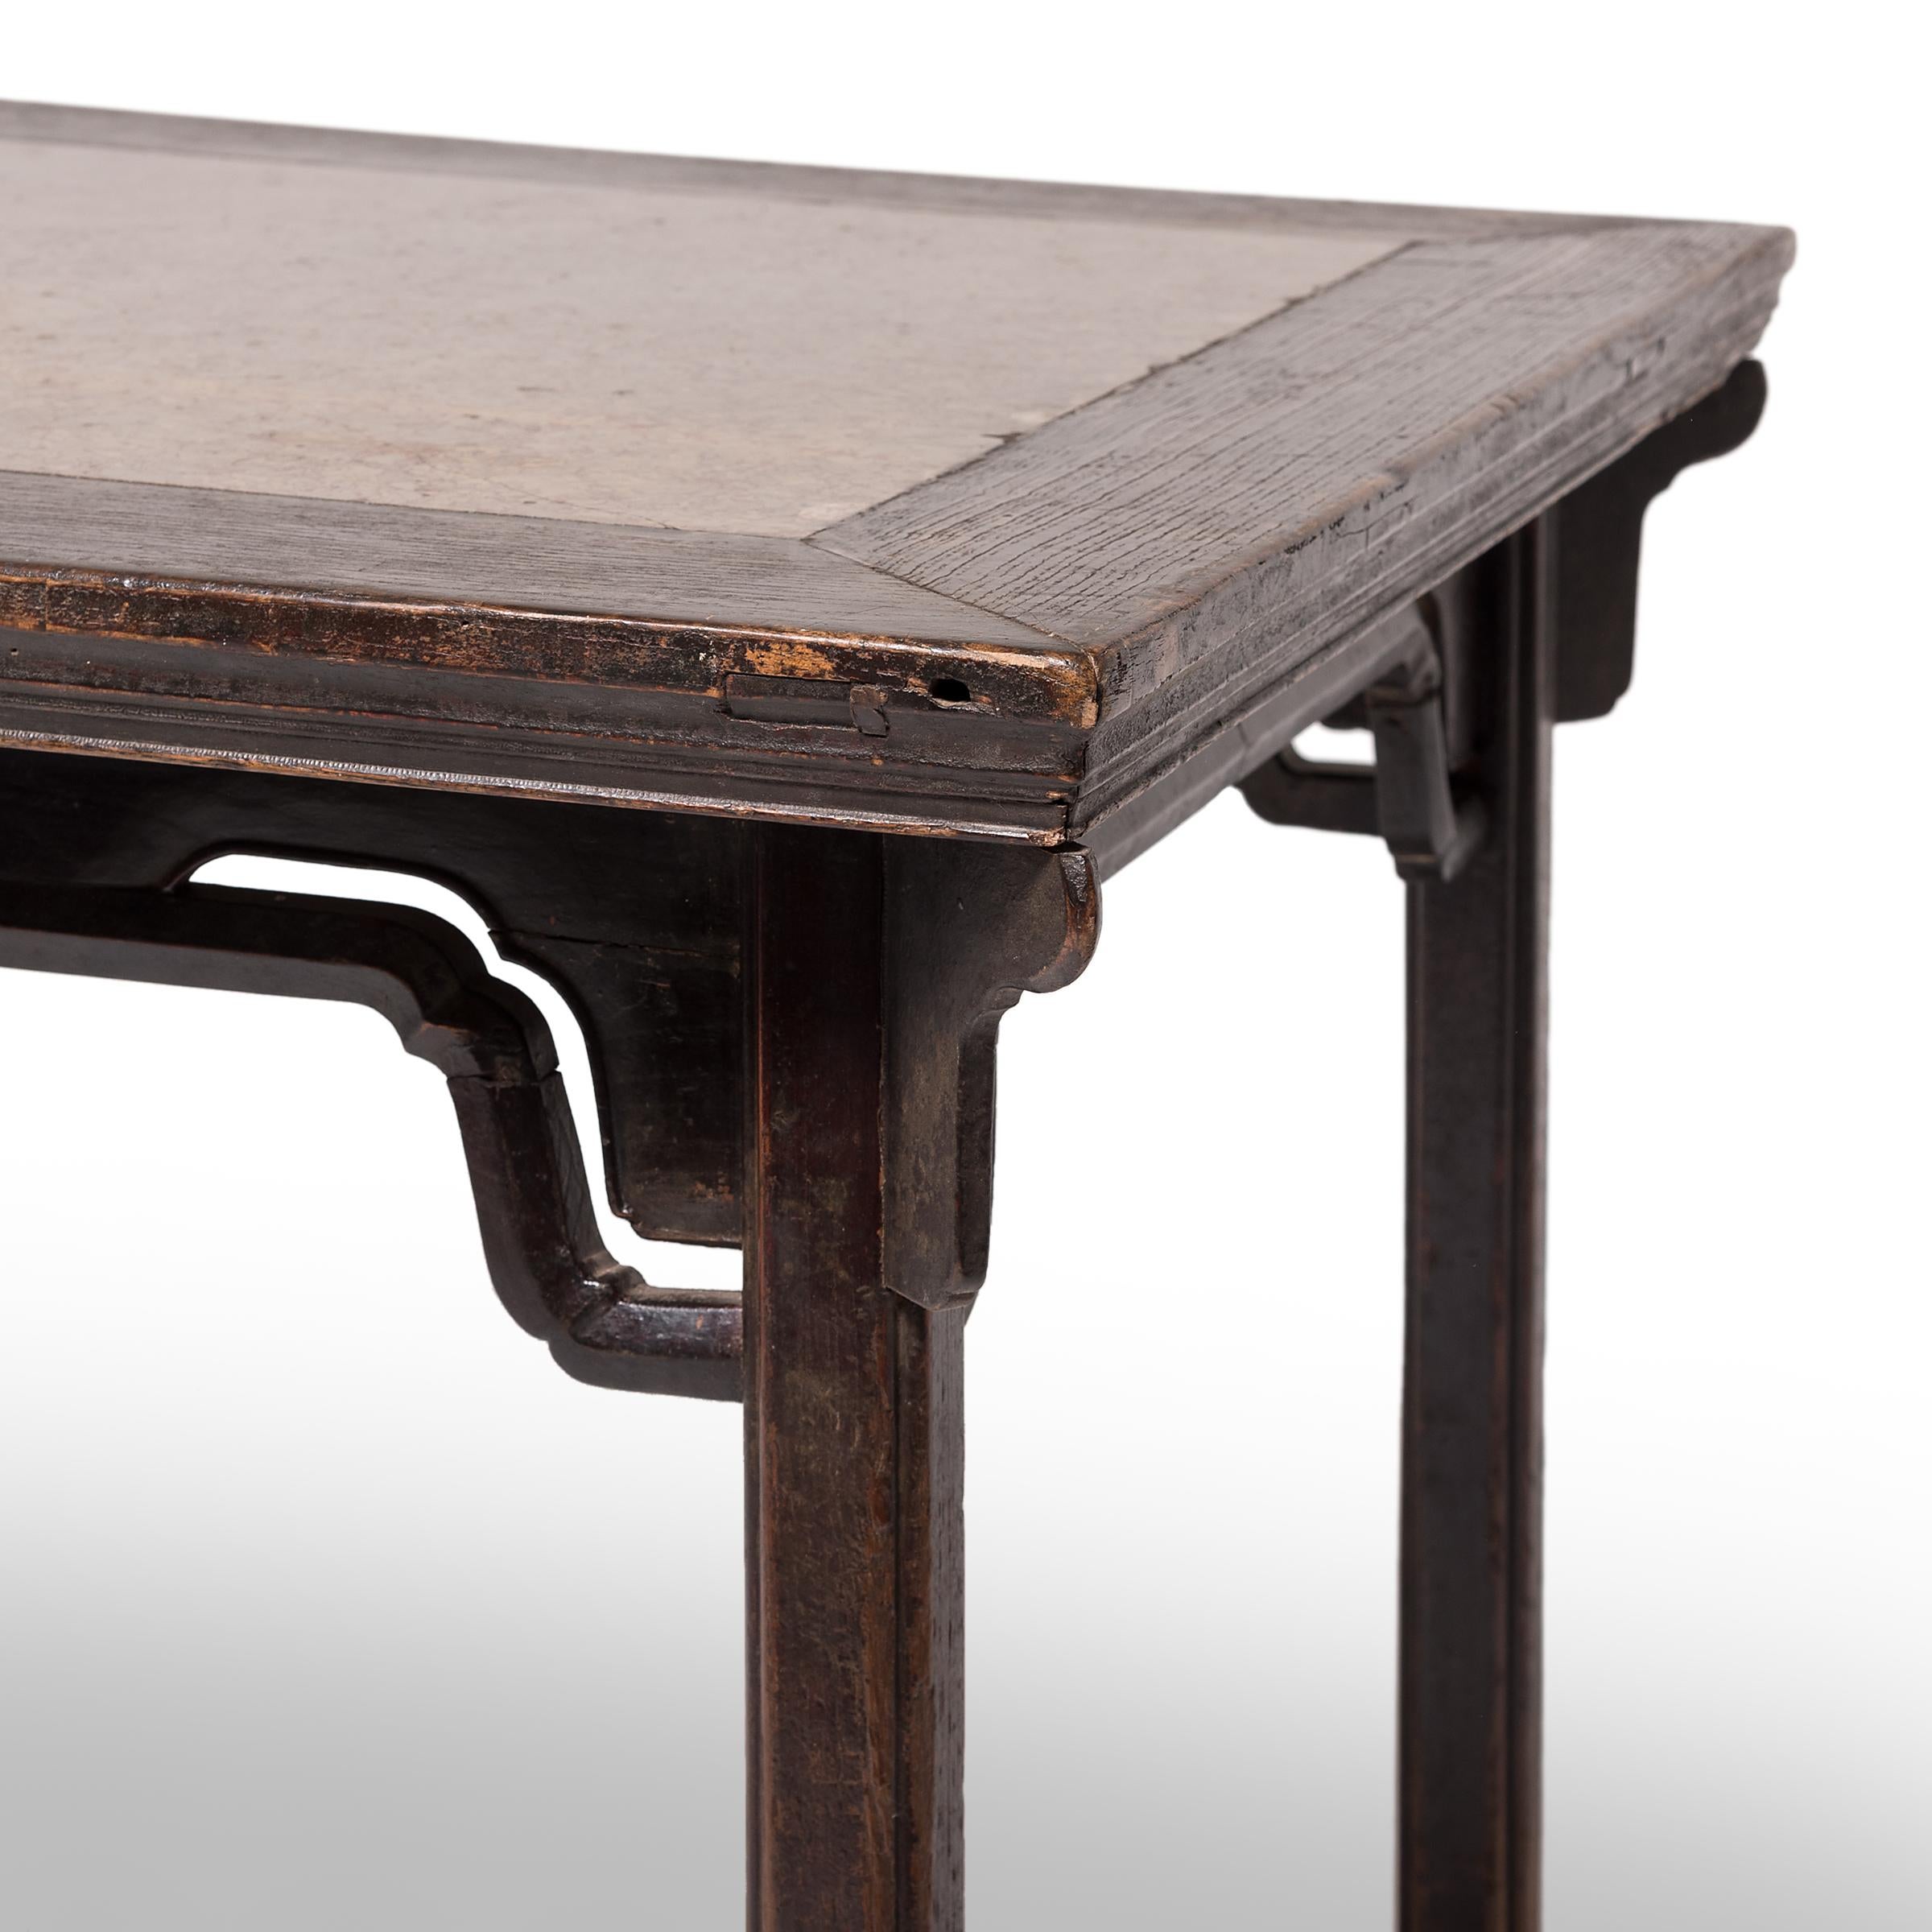 Qing Chinese Eight Immortals Square Table with Stone Top, circa 1800 For Sale